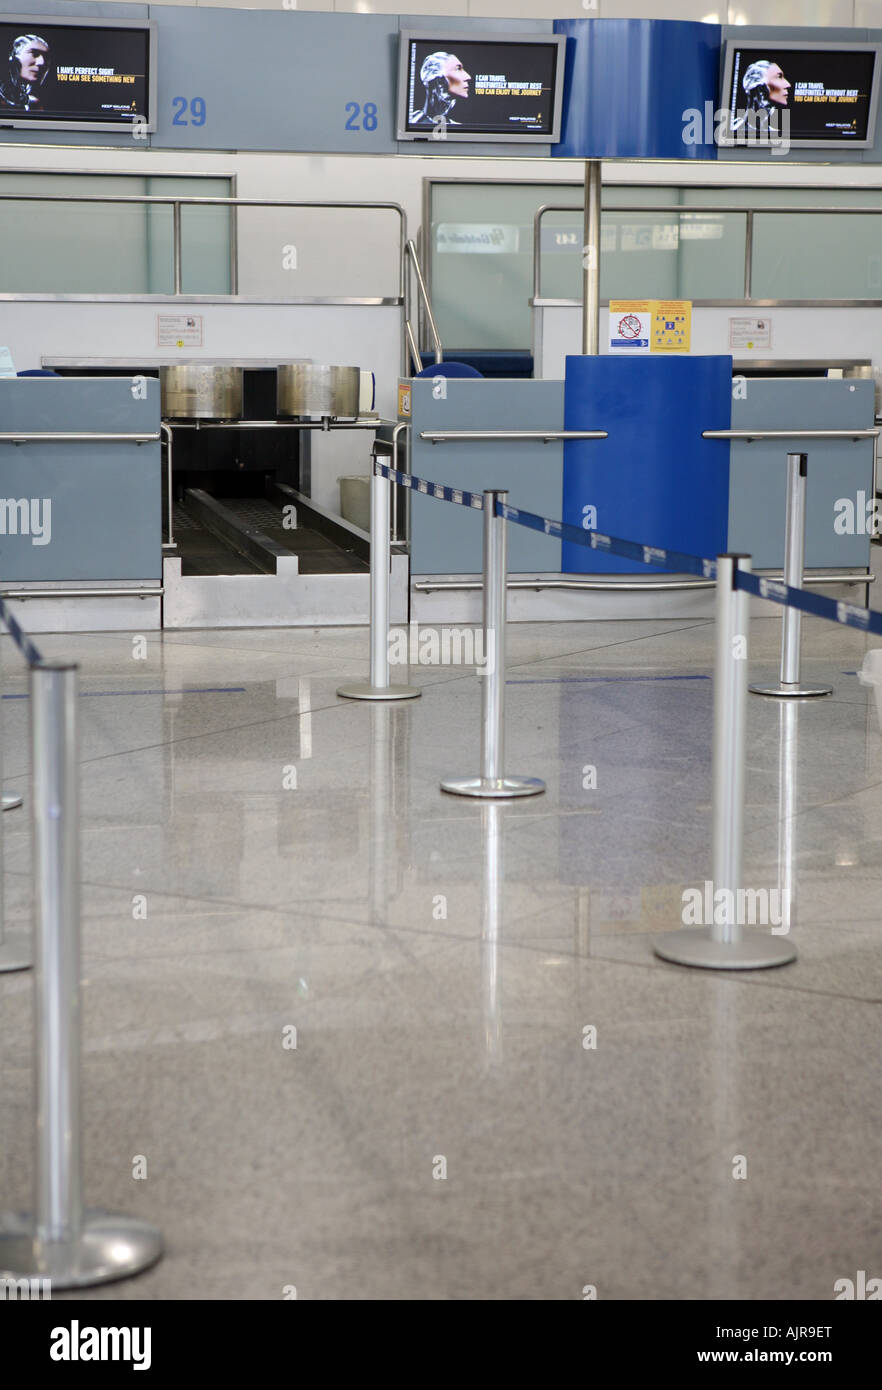 Check in counters at Eleftherios Venizelos International Airport Athens Greece Stock Photo